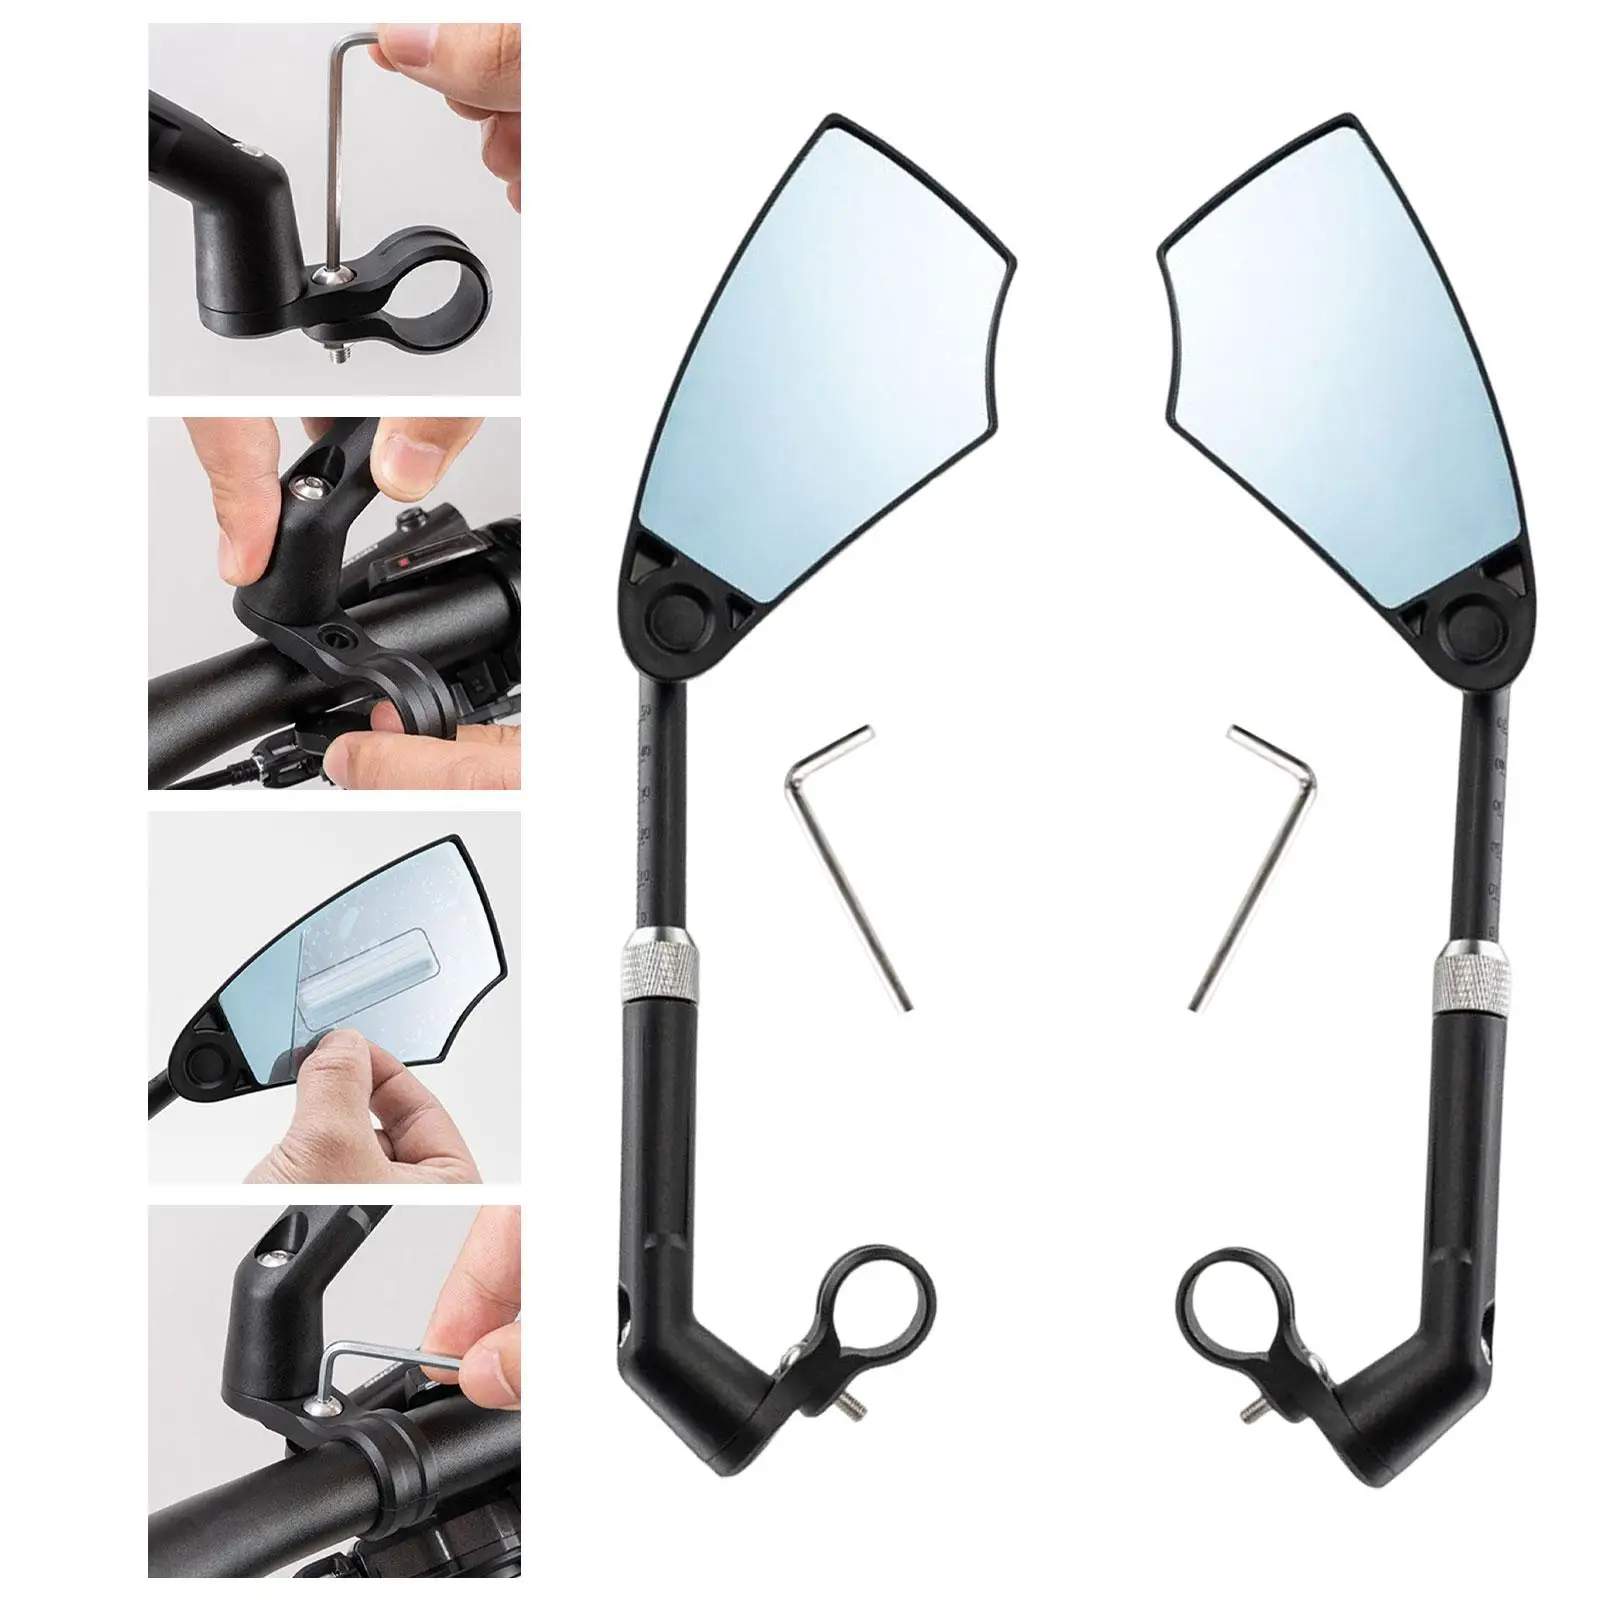 Bike Rear View Mirror Handlebar Universal Accessories Adjustable Bike Rear View Mirrors for Adult Cycling Riding Modification